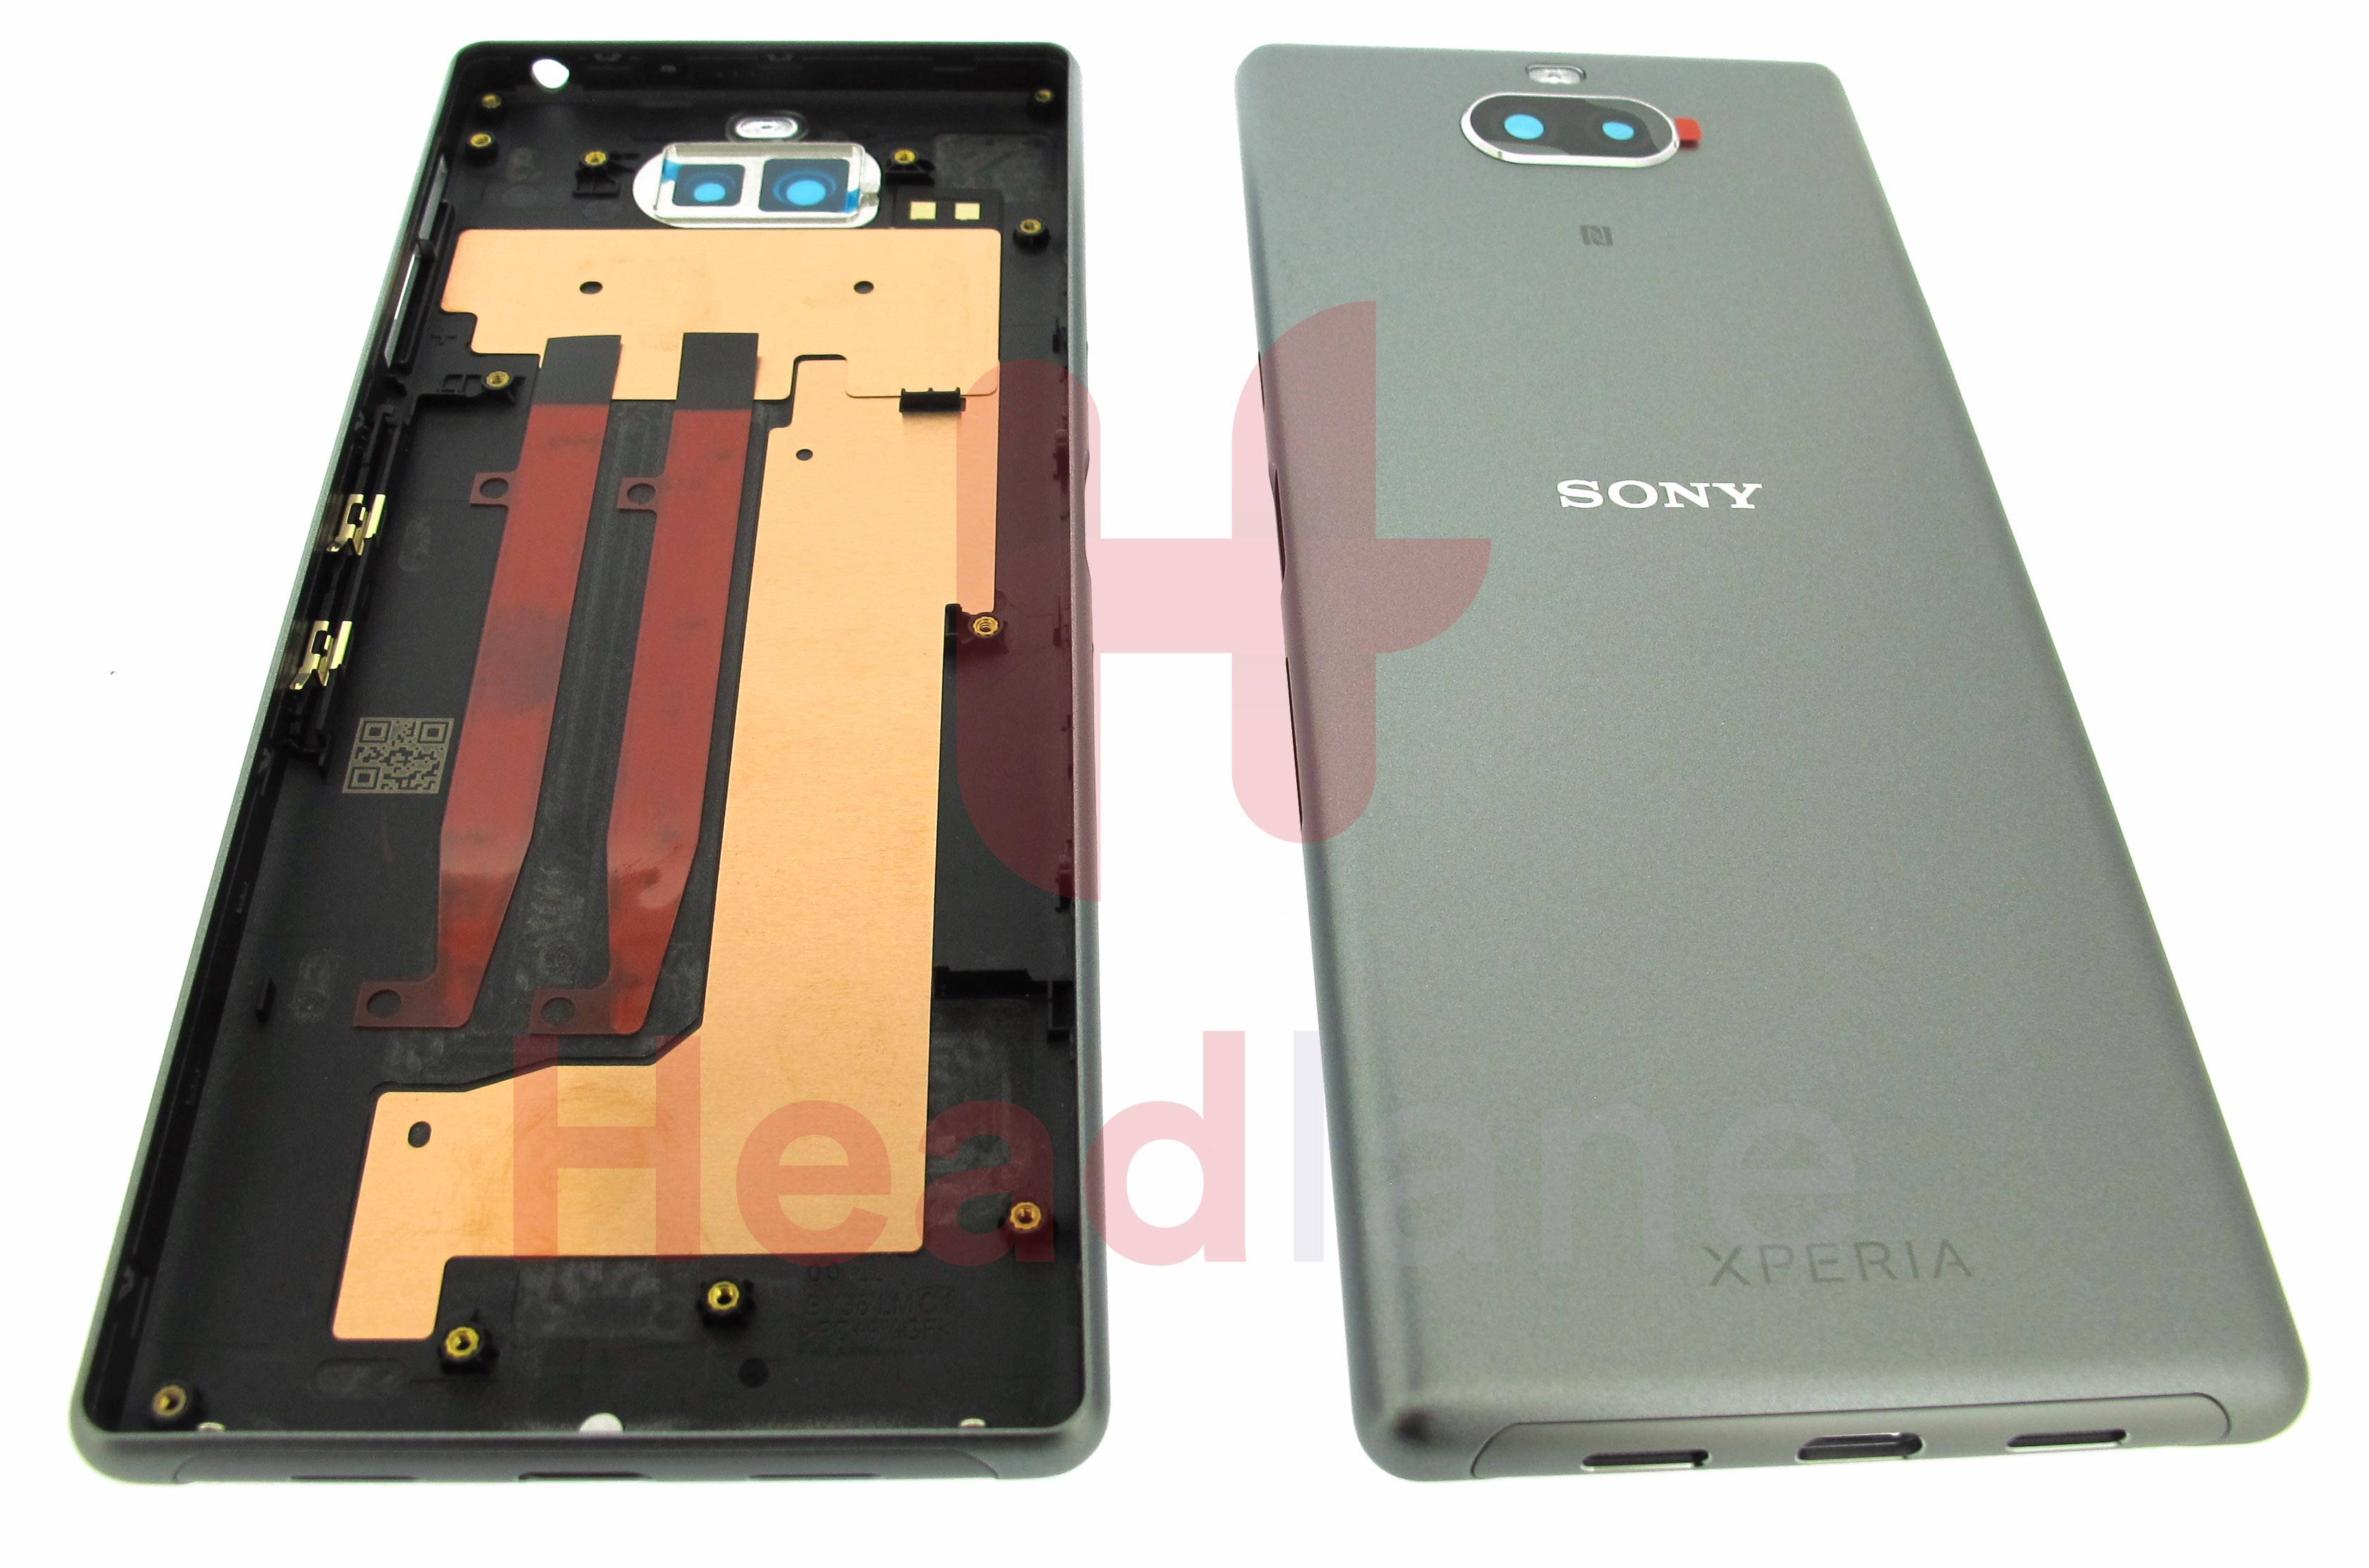 Sony I4113 - Xperia 10 Battery / Back Cover - Silver